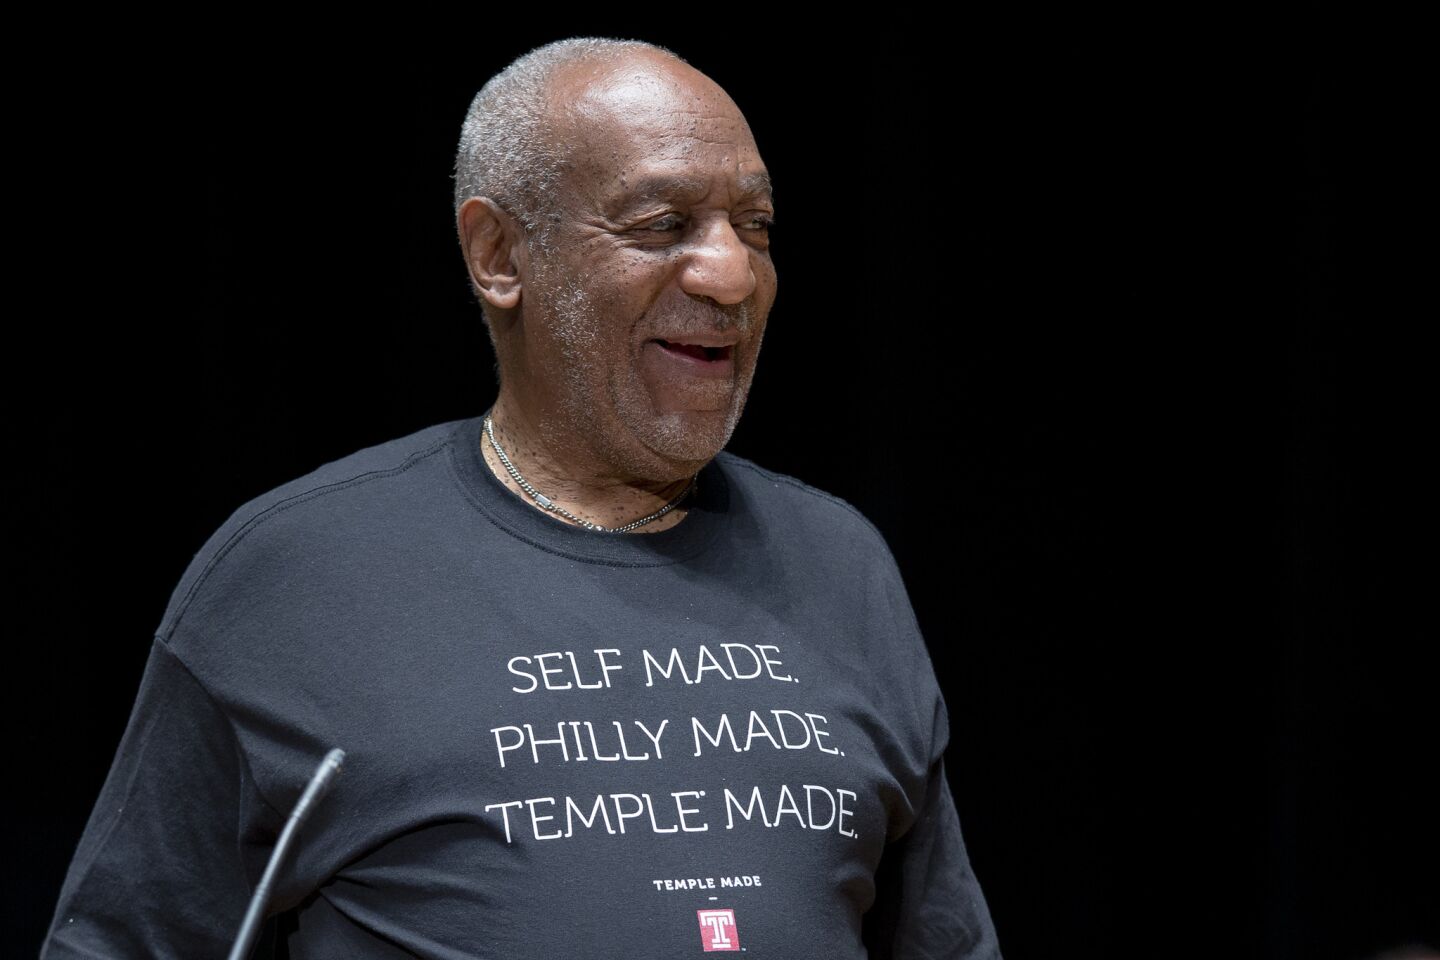 In case you hadn't heard, Bill Cosby is alive and well. The comedian was just the latest celebrity to undergo the Google Age ritual of death hoaxes. The most recent hoax -- courtesy of an "R.I.P. Bill Cosby" Facebook page in August 2012 -- garnered only a tweet of a trademark sweater from the man himself and no mention whatsoever of the scam, which is a distinct change from Cosby's reaction to a similar hoax that trended back in 2010, when Cosby called in to "Larry King Live" to chat about that Twitter-propagated death hoax. "Emotional friends have called about this misinformation," he said on his own Twitter account. "To the people behind the foolishness, I'm not sure you see how upsetting this is." The 2012 hoax is the fifth time it's happened, and, at least for the veteran comedian, it's just not funny anymore. Cosby is just the latest celebrity to fall victim to a death hoax. Let's take a look back at some of the rest. More: Bill Cosby not dead; hoax starter gloats over troll-fest | Bill Cosby not pleased about fourth death hoax